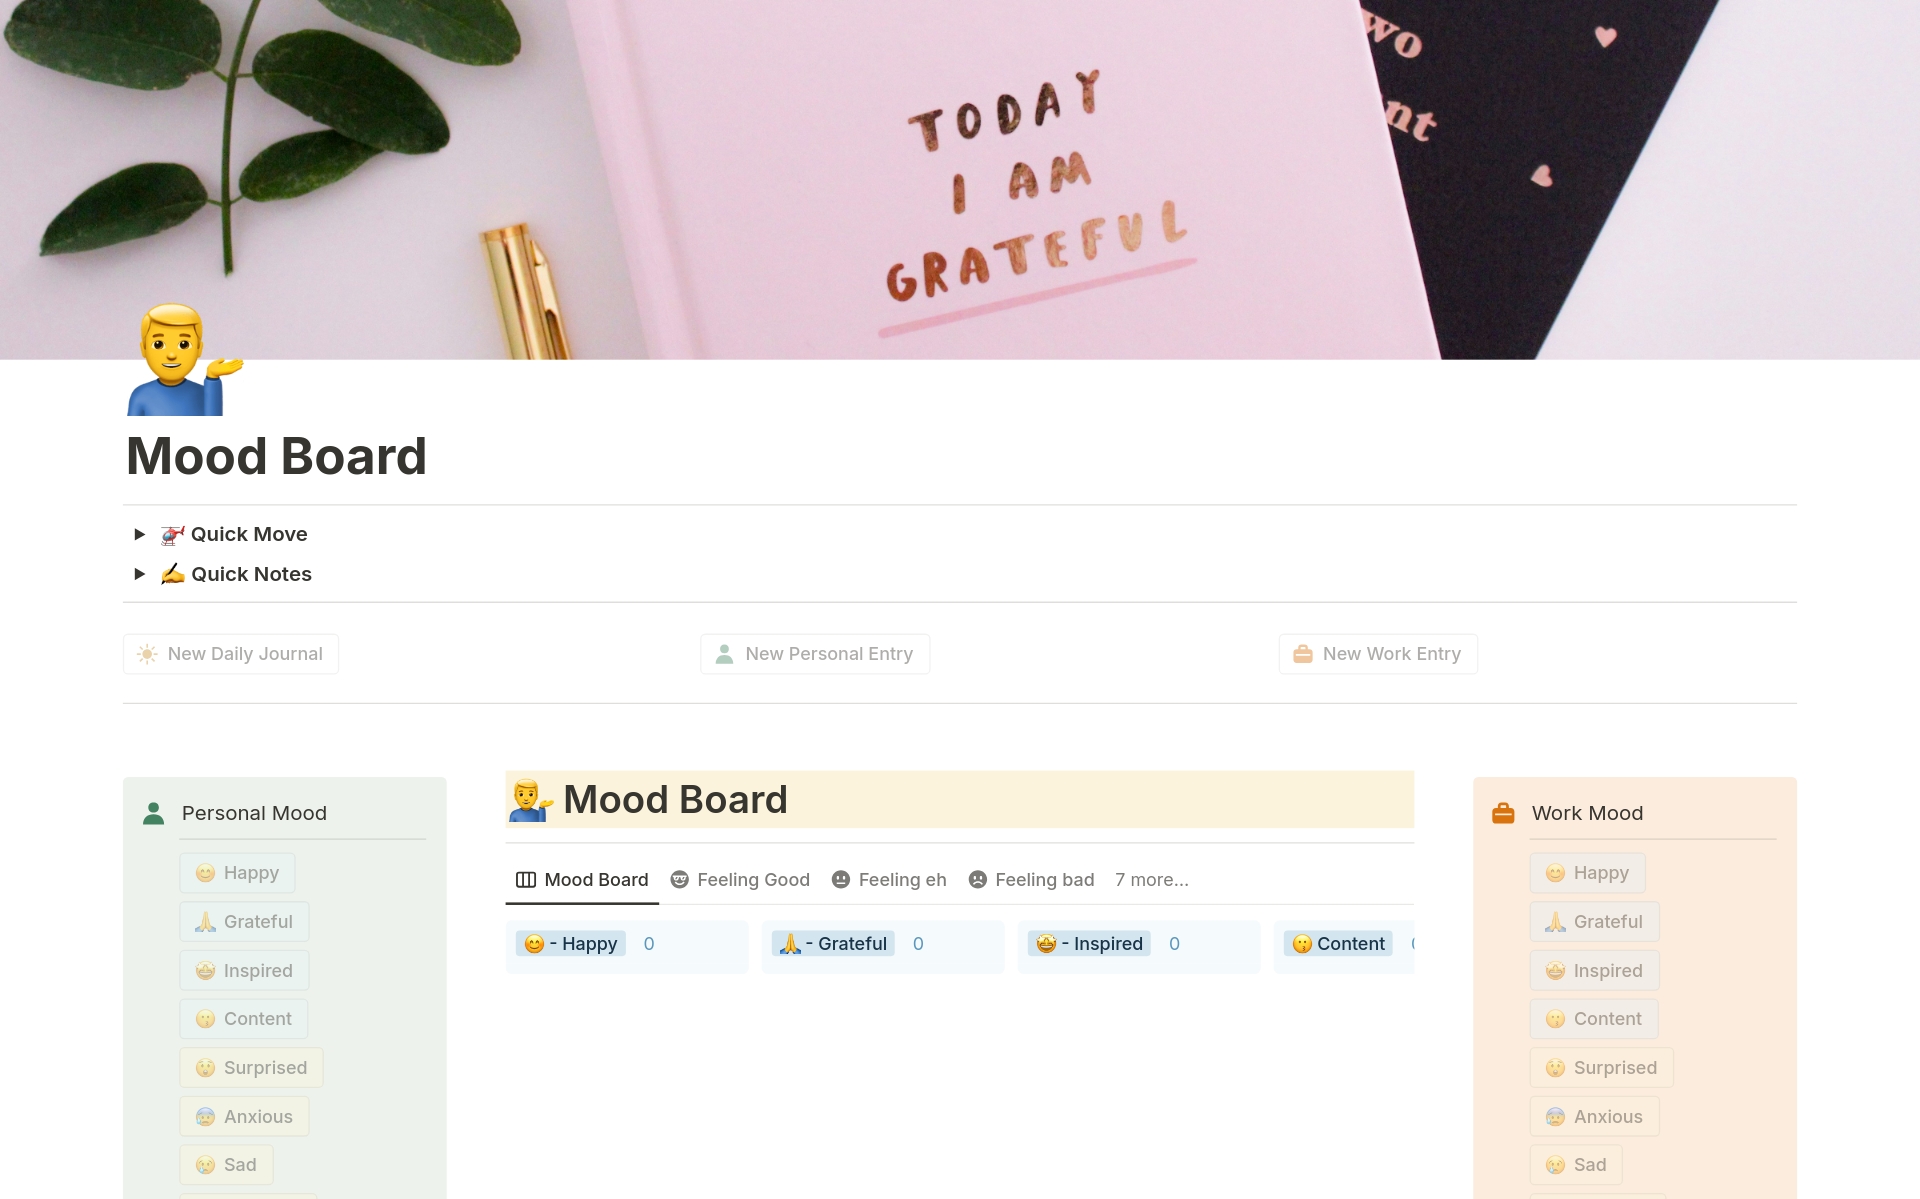 A neat place to keep all your thoughts organized and together and plan your days, morning and evening. Built to copy the format I used when journaling in the military and used daily. The mood board is a great way to track your wellbeing overtime.